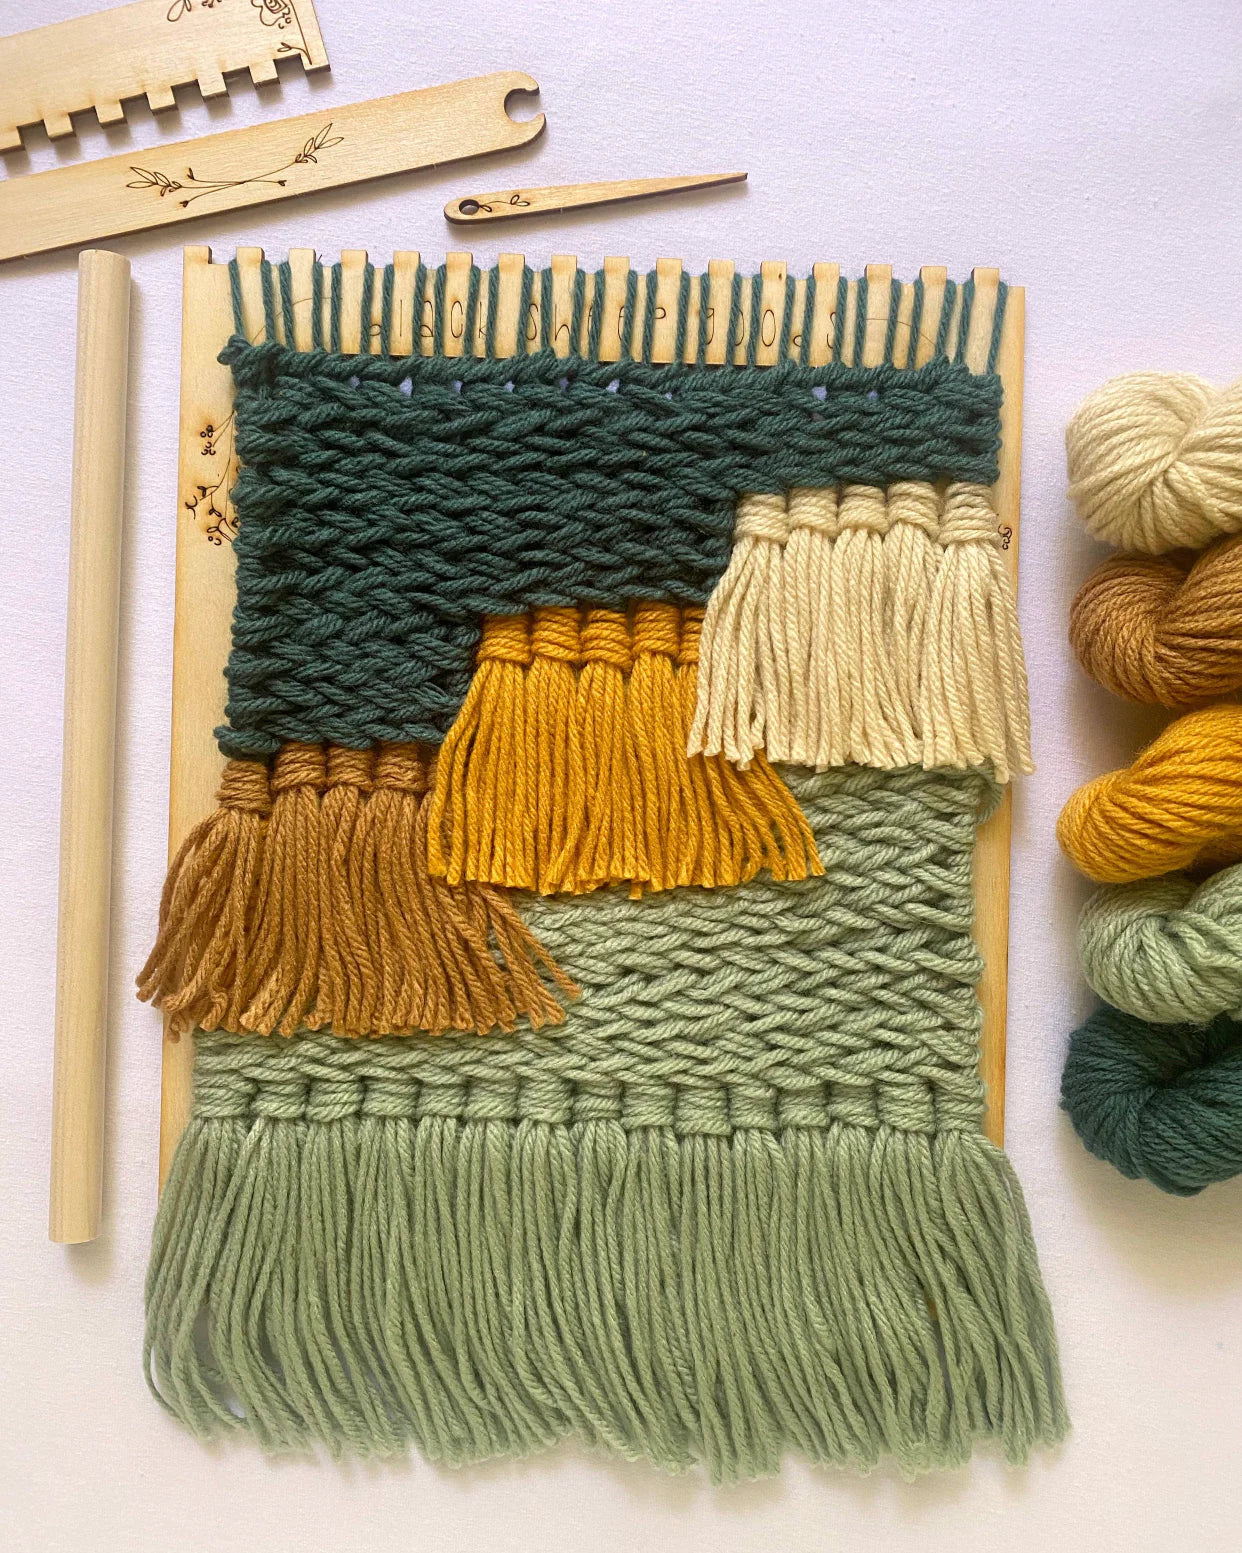 Private Group Class - Weaving Class